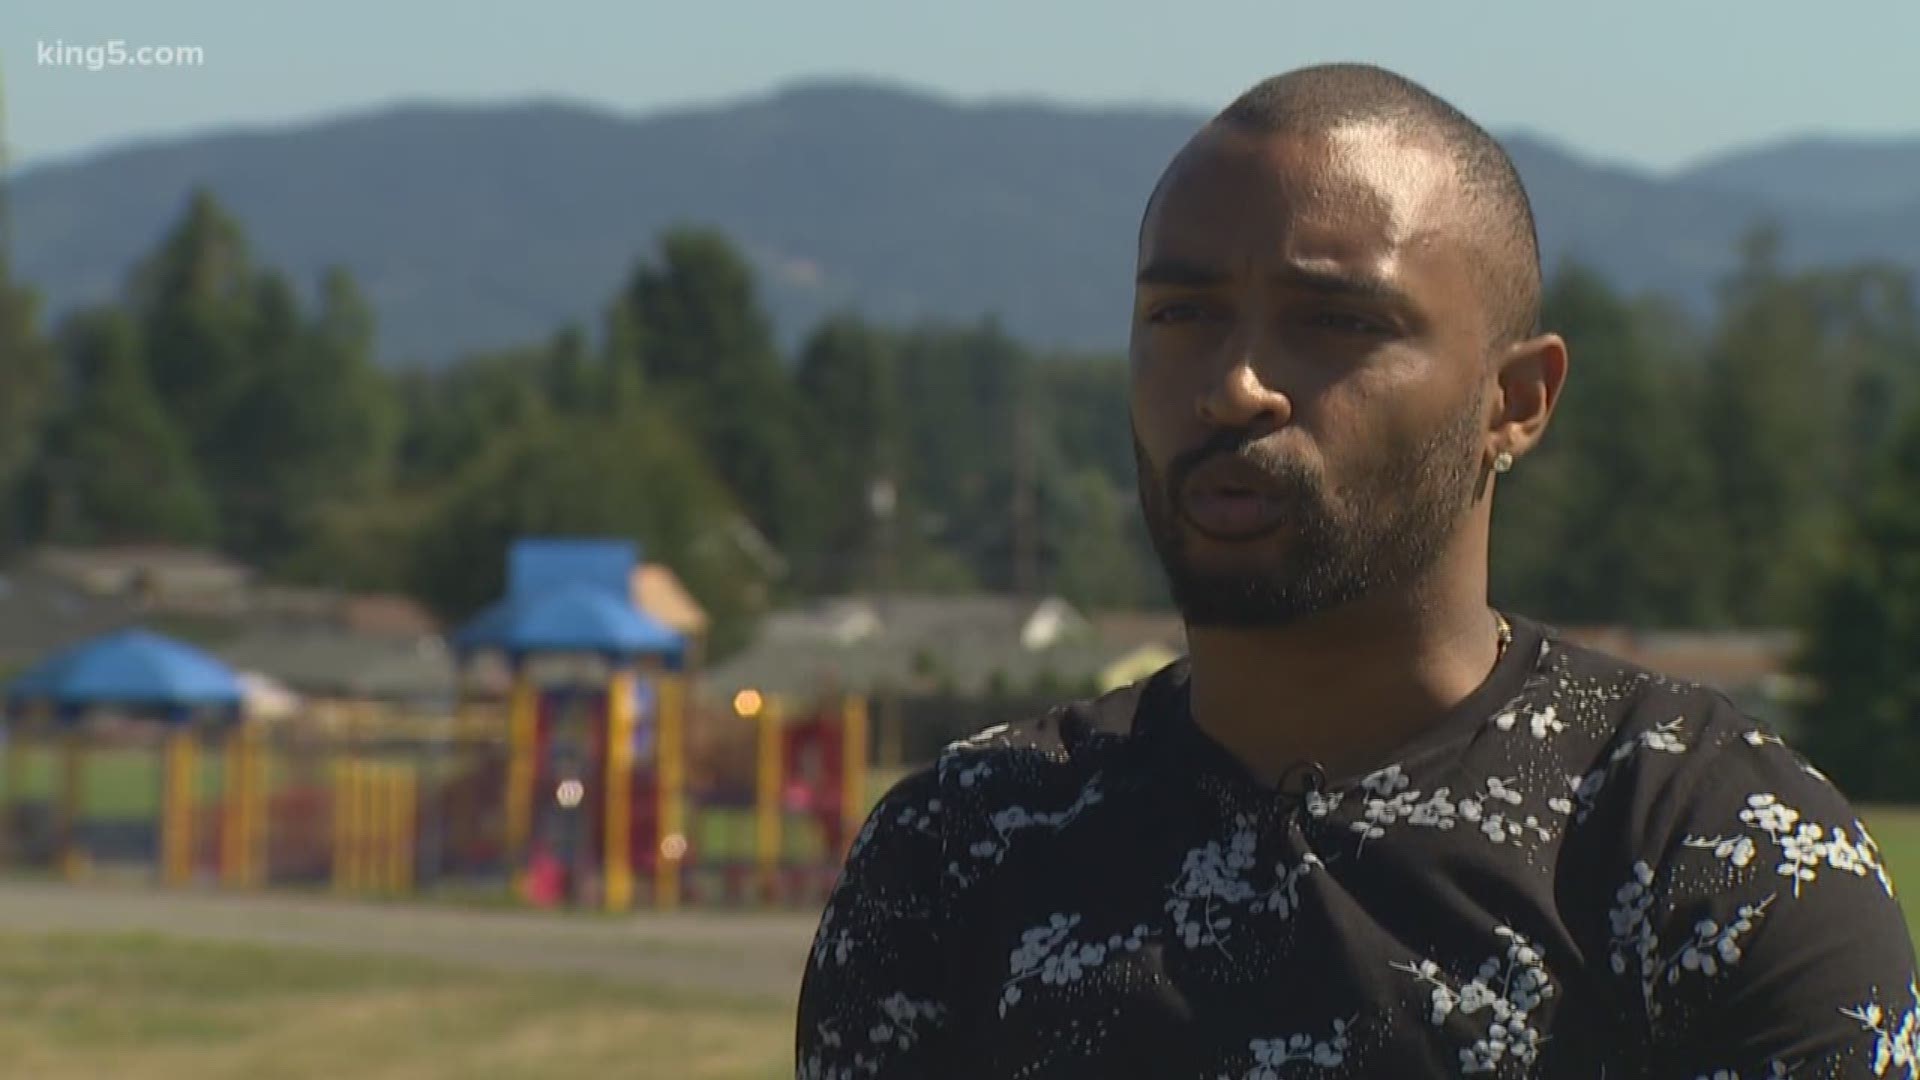 Doug Baldwin is working to raise money for a community center in Renton to give kids a place to go.